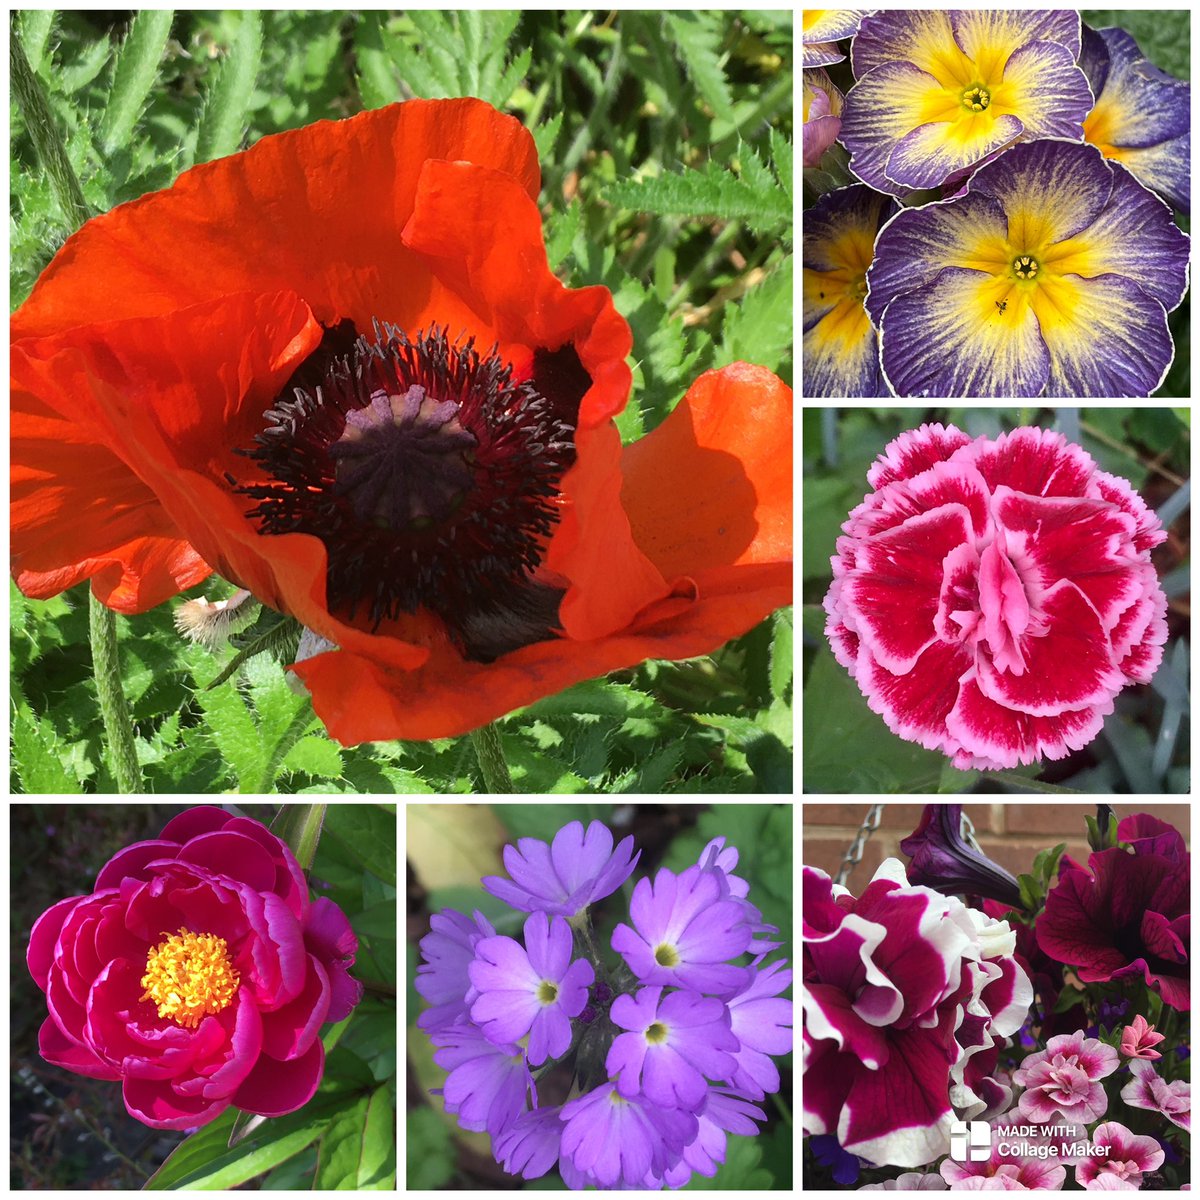 For #AlphabetChallenge #WeekP Poppy, Primrose, Pink, Petunia, Primula denticulata & Peony in our garden over the last year 💐